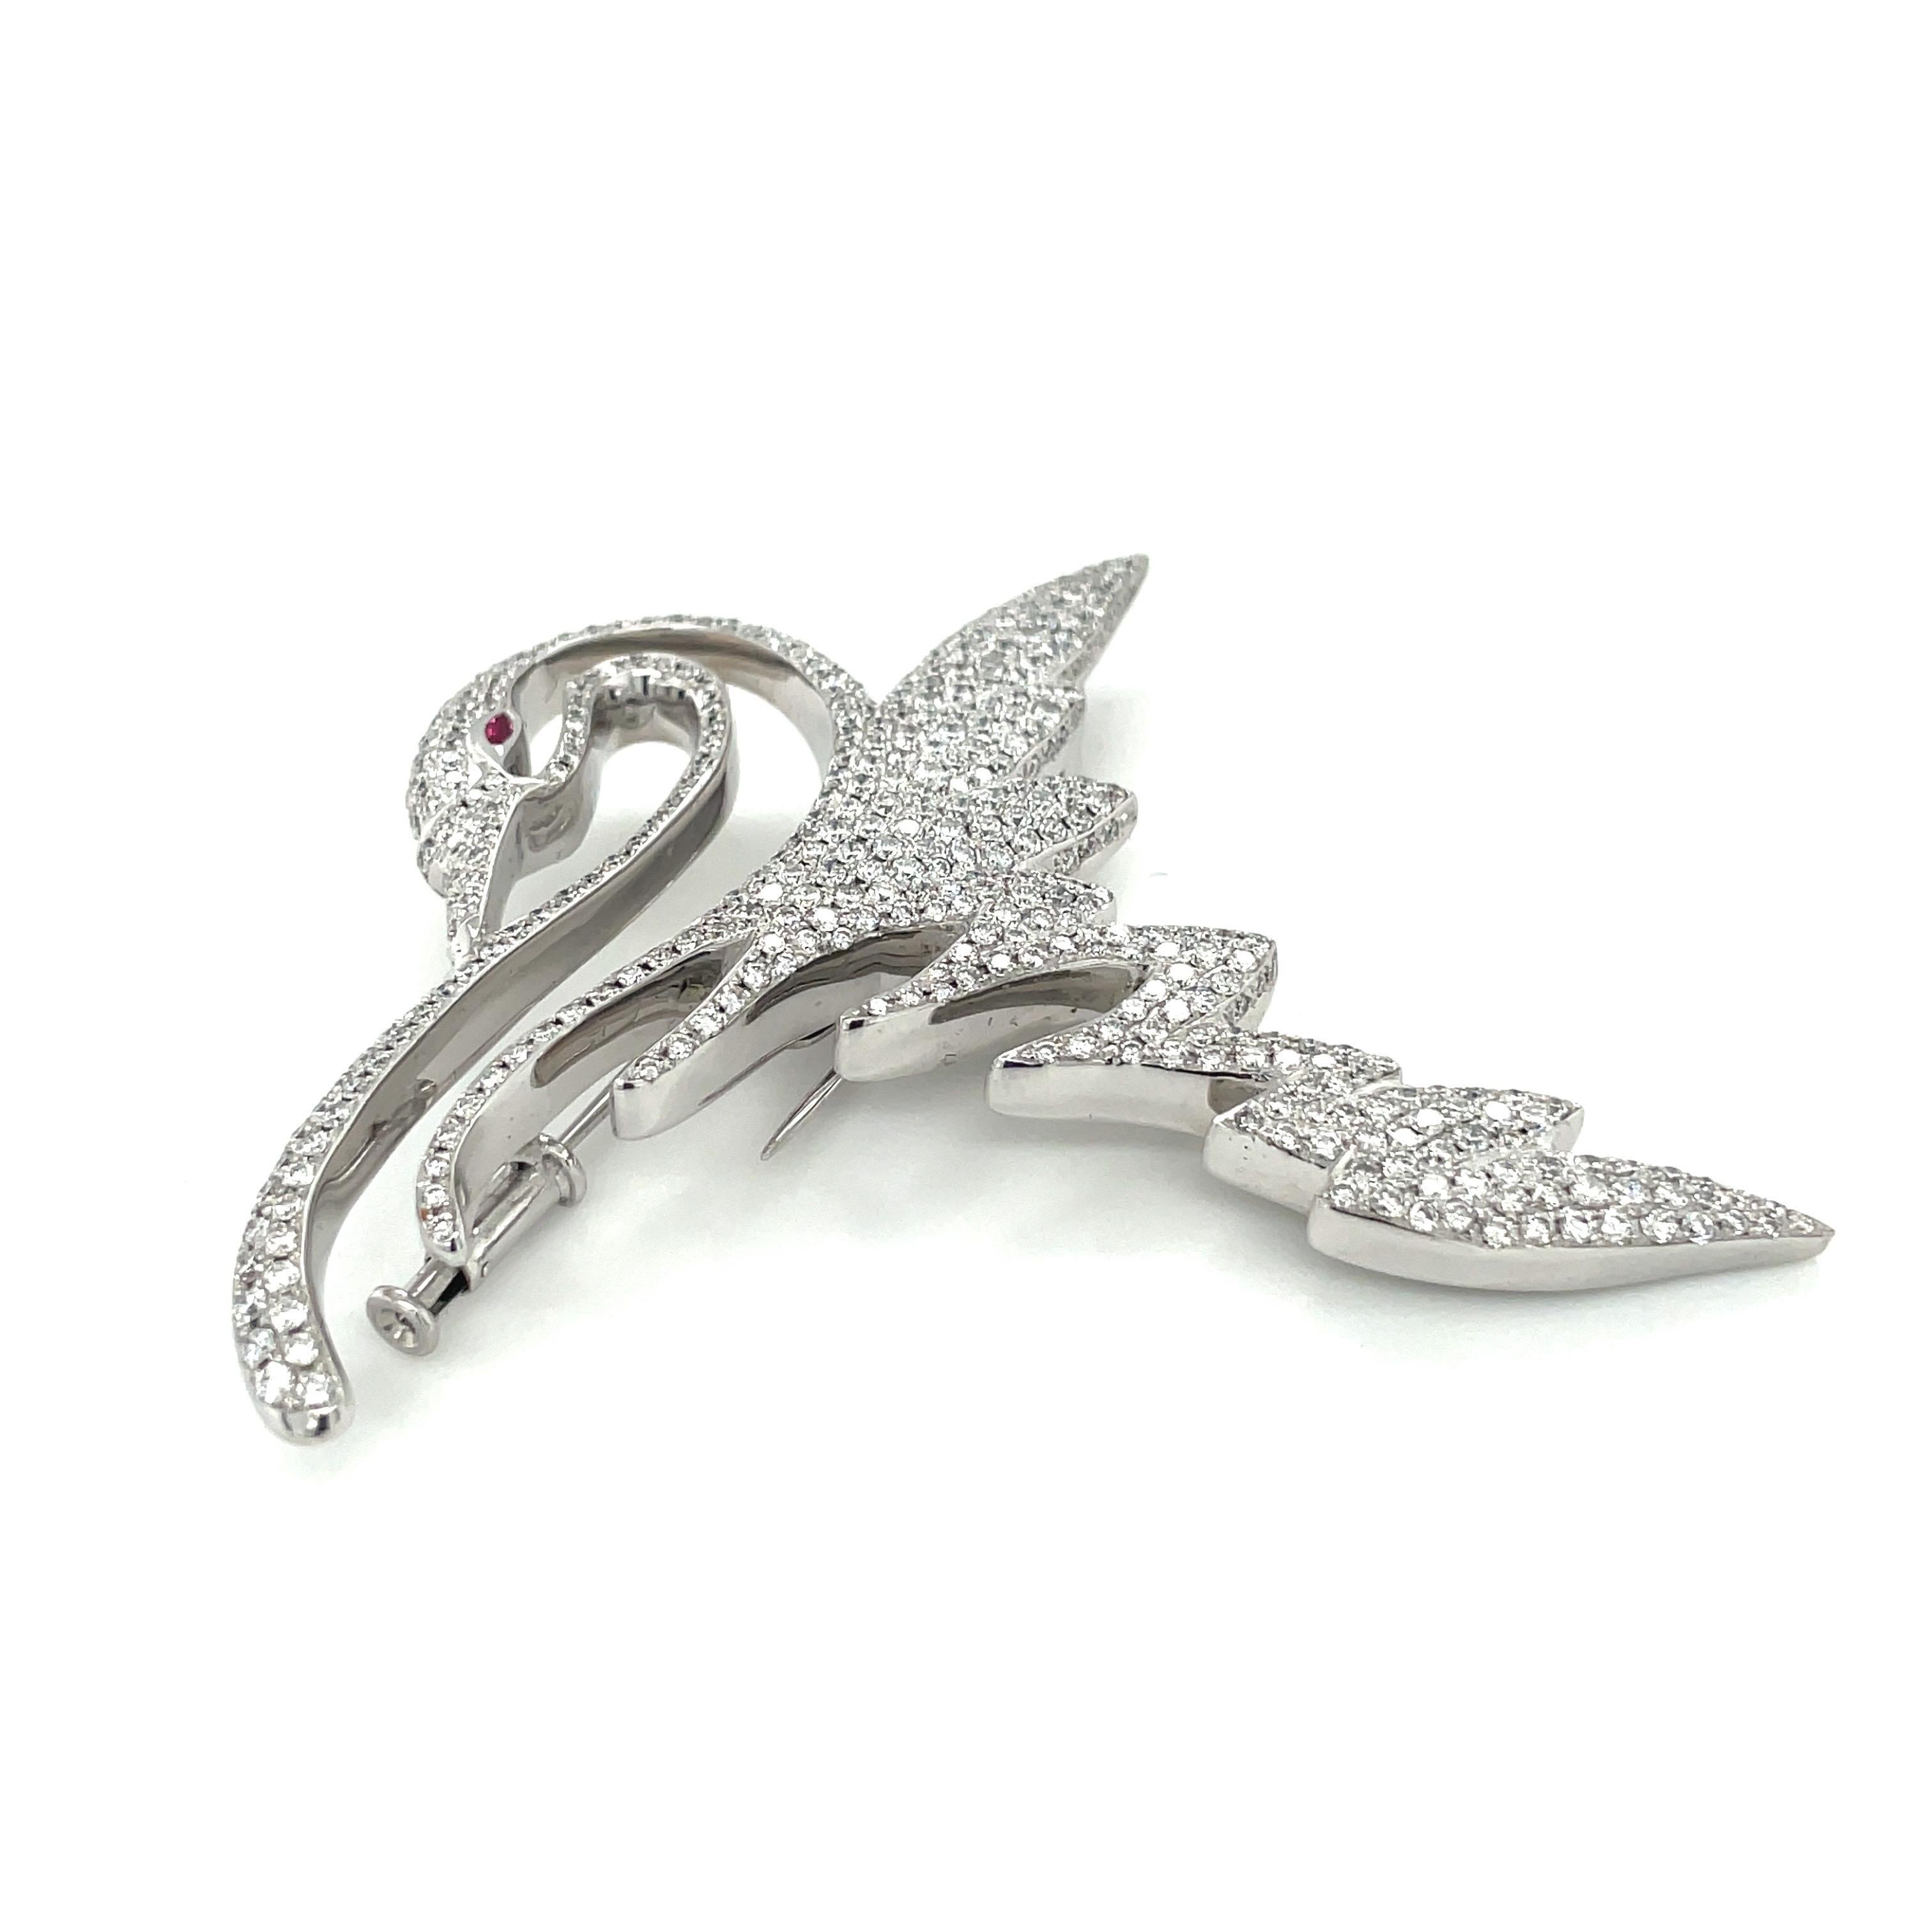 Round Cut Cellini Jewelers 18kt White Gold 4.30Ct. Diamond Swan Brooch For Sale